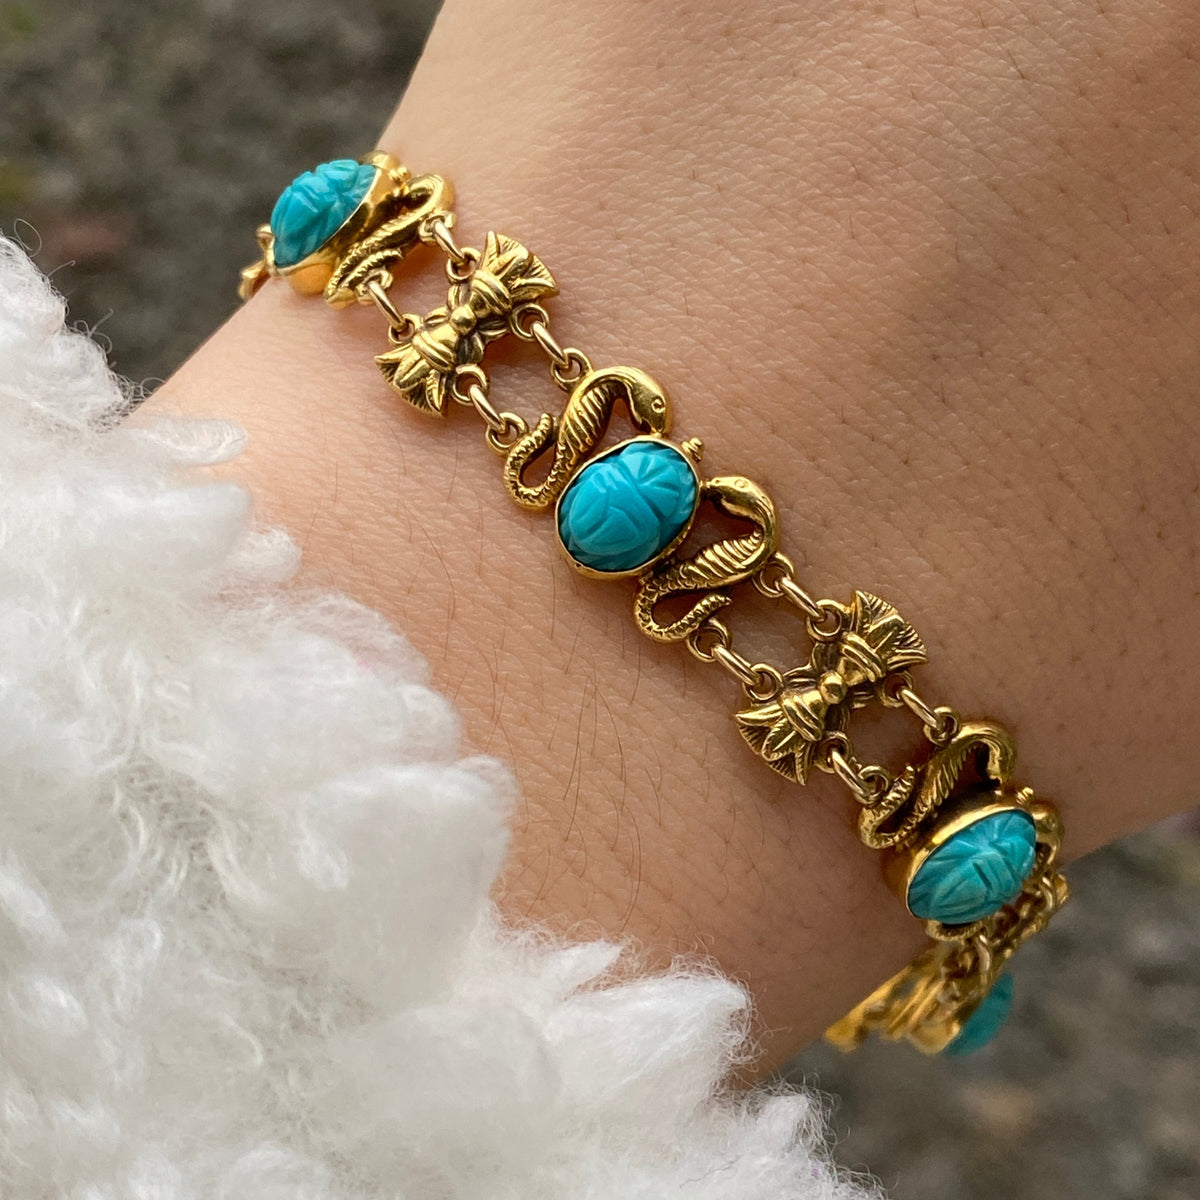 Victorian Egyptian Revival Carved Turquoise Scarab and 14K Gold Lotus, Snake Bracelet